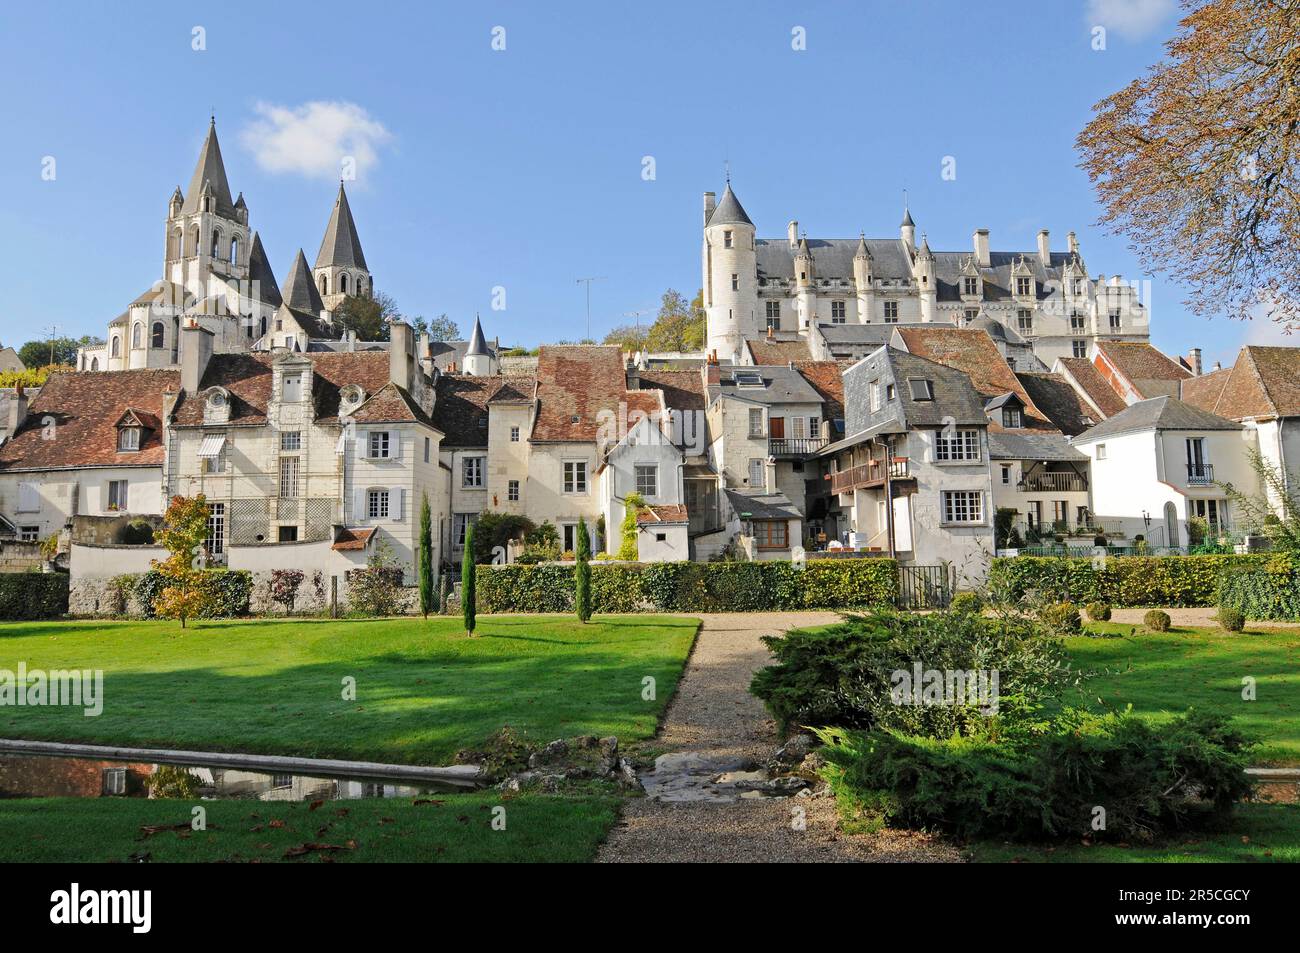 Loches Castle, Royal, Tower r Agnes Sorel, Chateau, Castles r, Saint-Ours Church, Logis Royal, Residence, Castle Hill, Loches, Tours, Department of Stock Photo